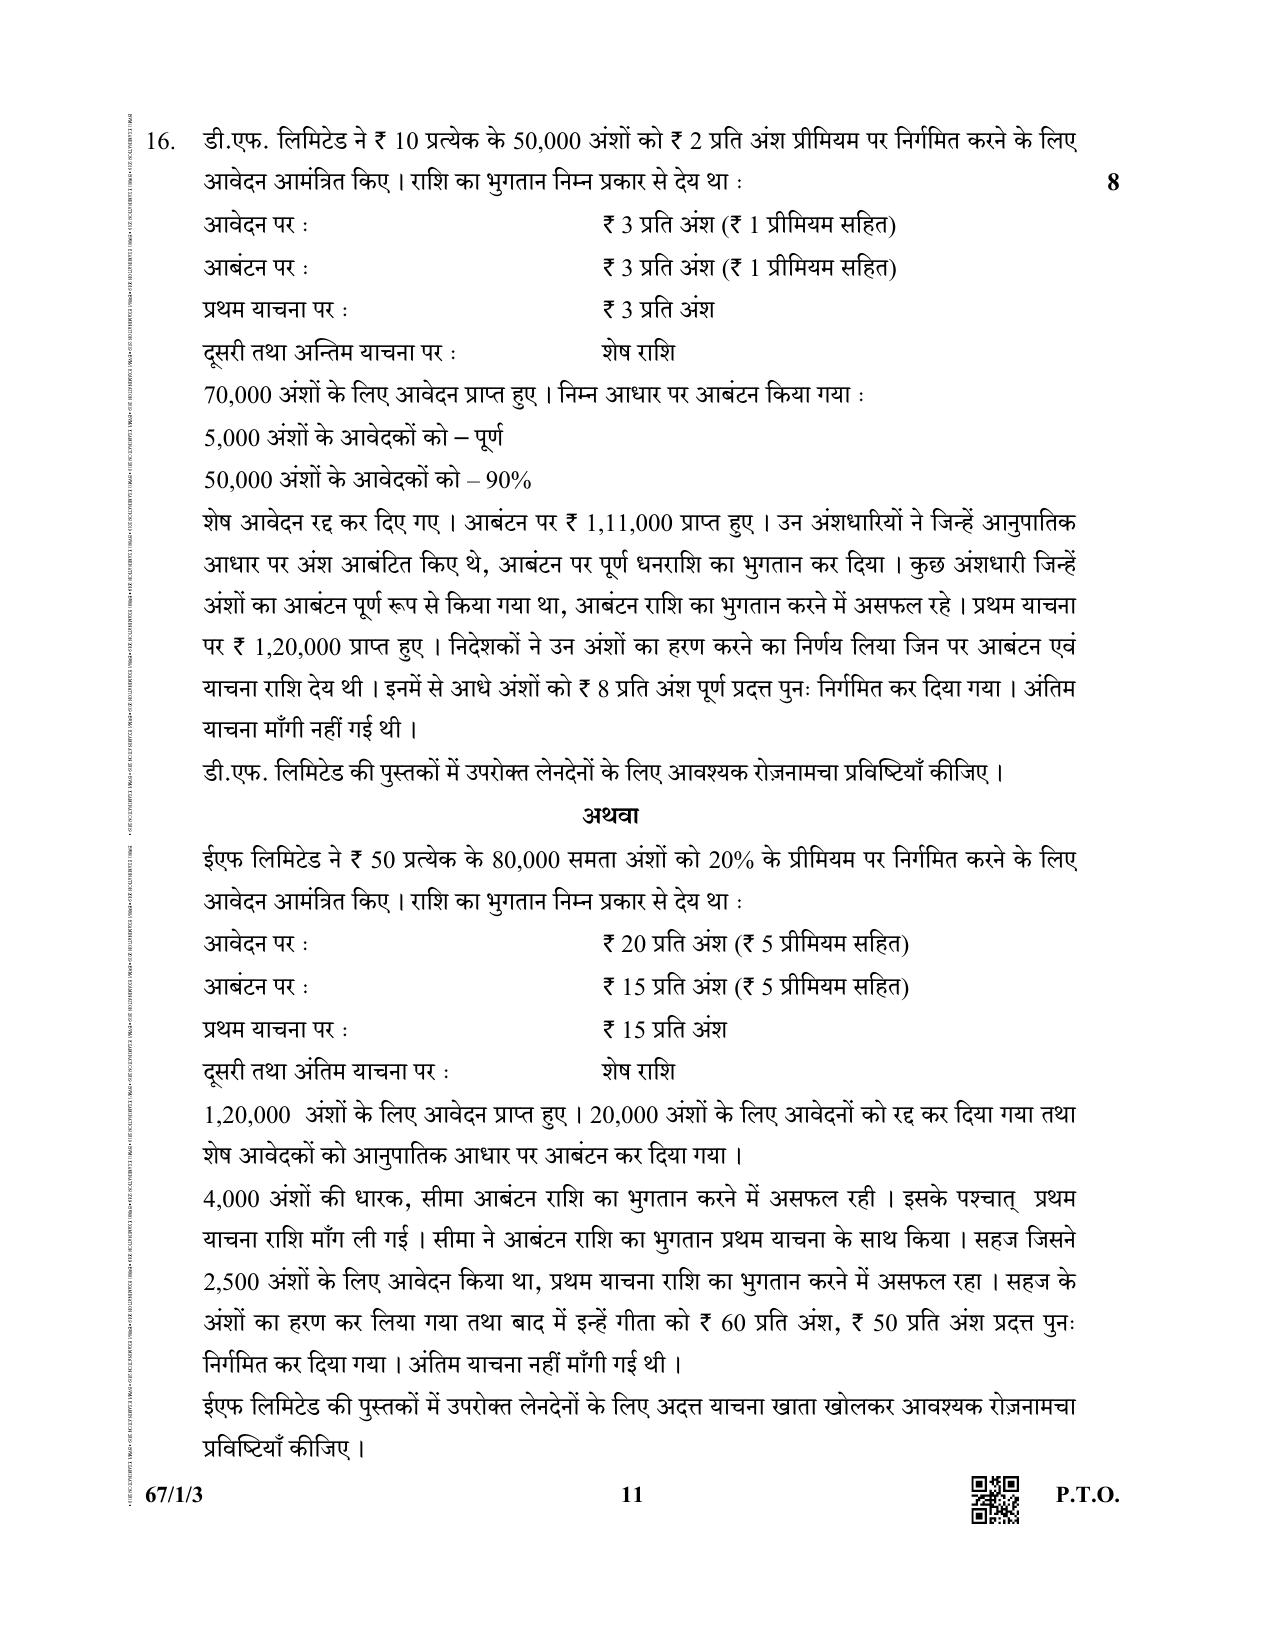 CBSE Class 12 67-1-3  (Accountancy) 2019 Question Paper - Page 11